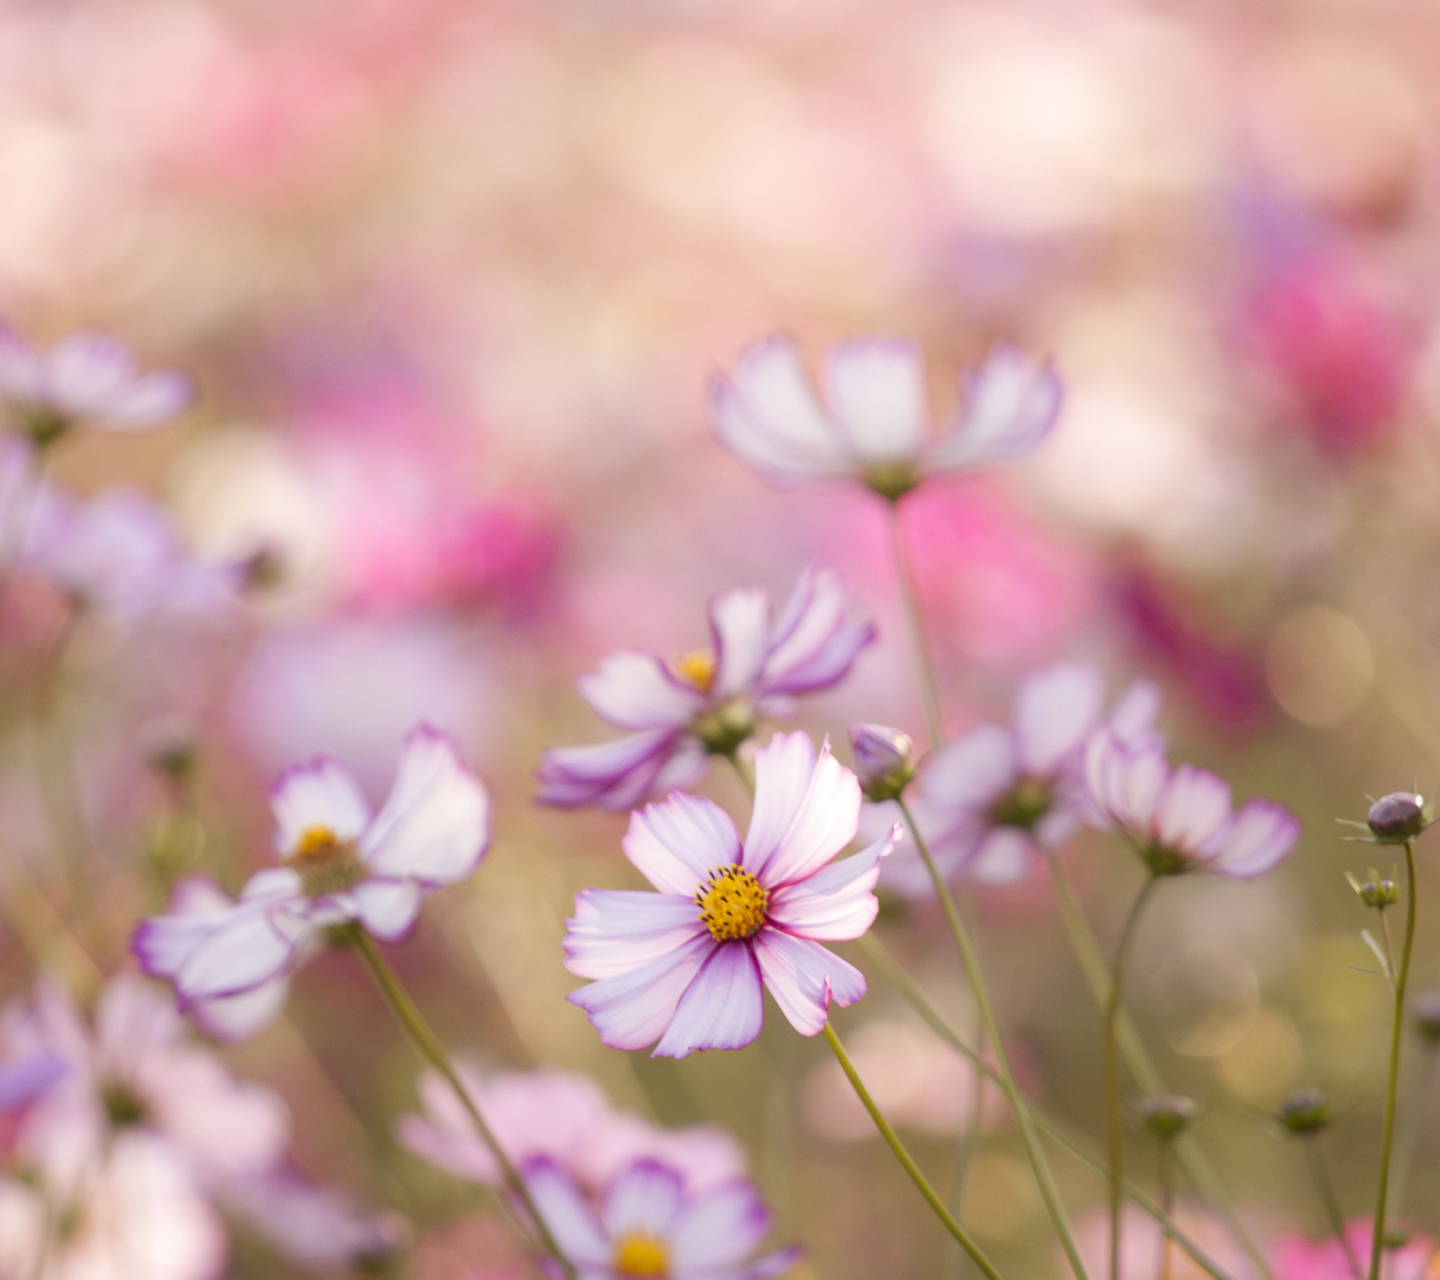 Field Of White And Pink Petals wallpaper 1440x1280